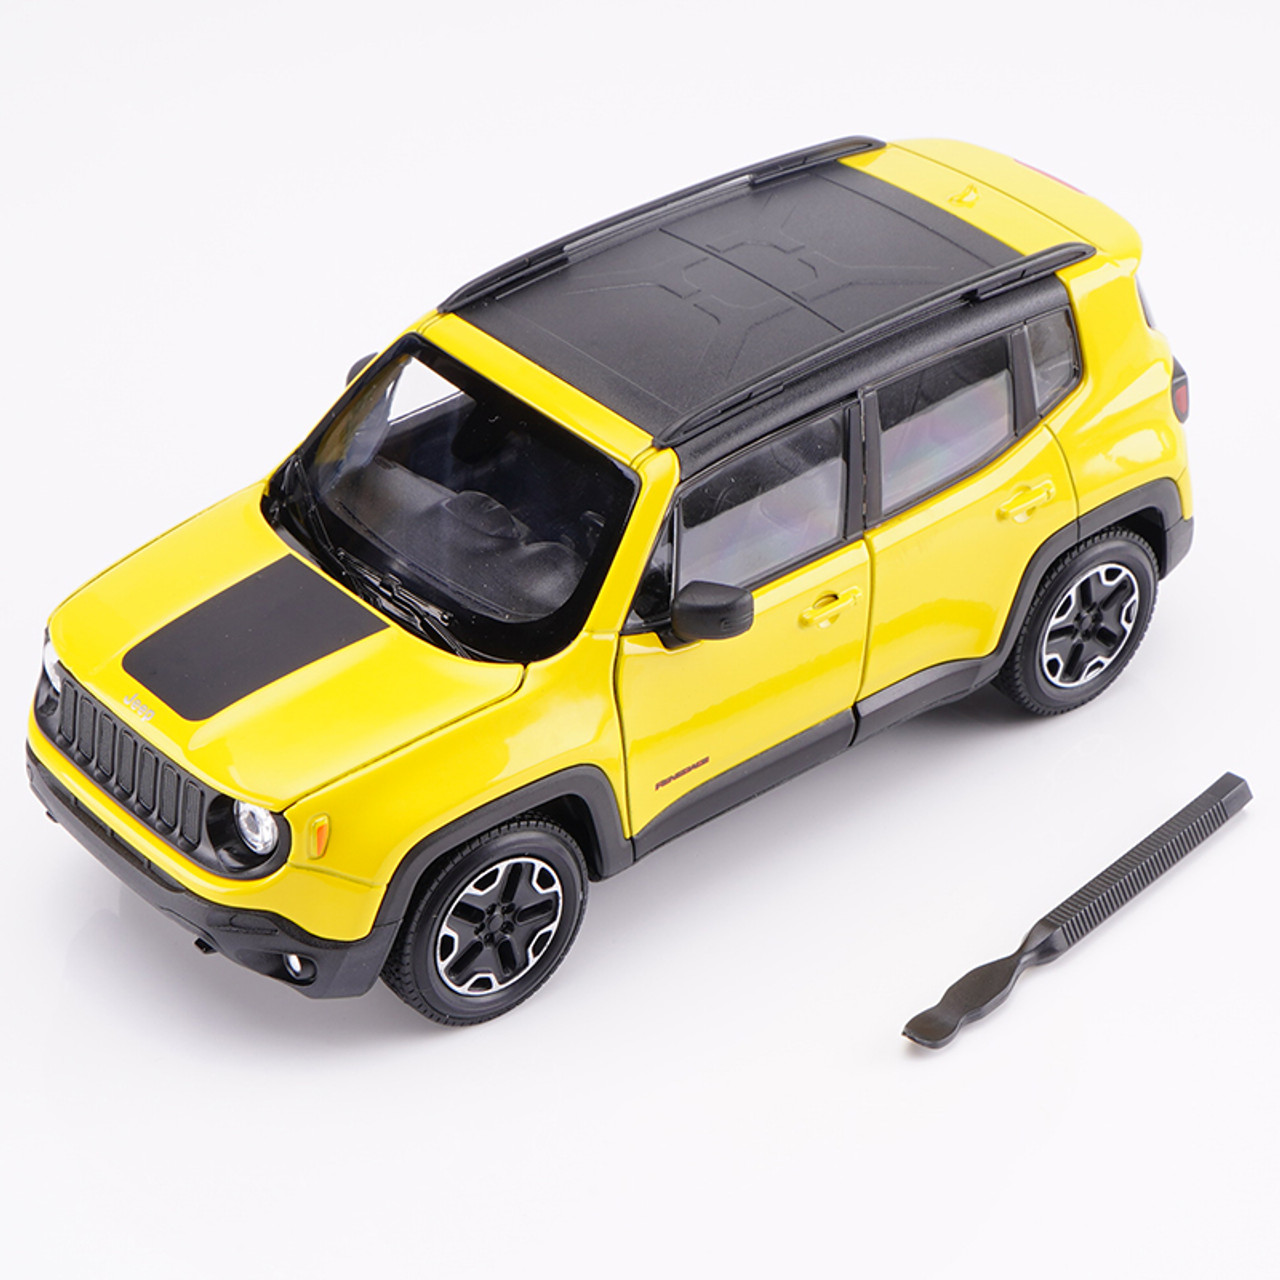 1/24 Welly FX Jeep Renegade (Yellow) Diecast Car Model